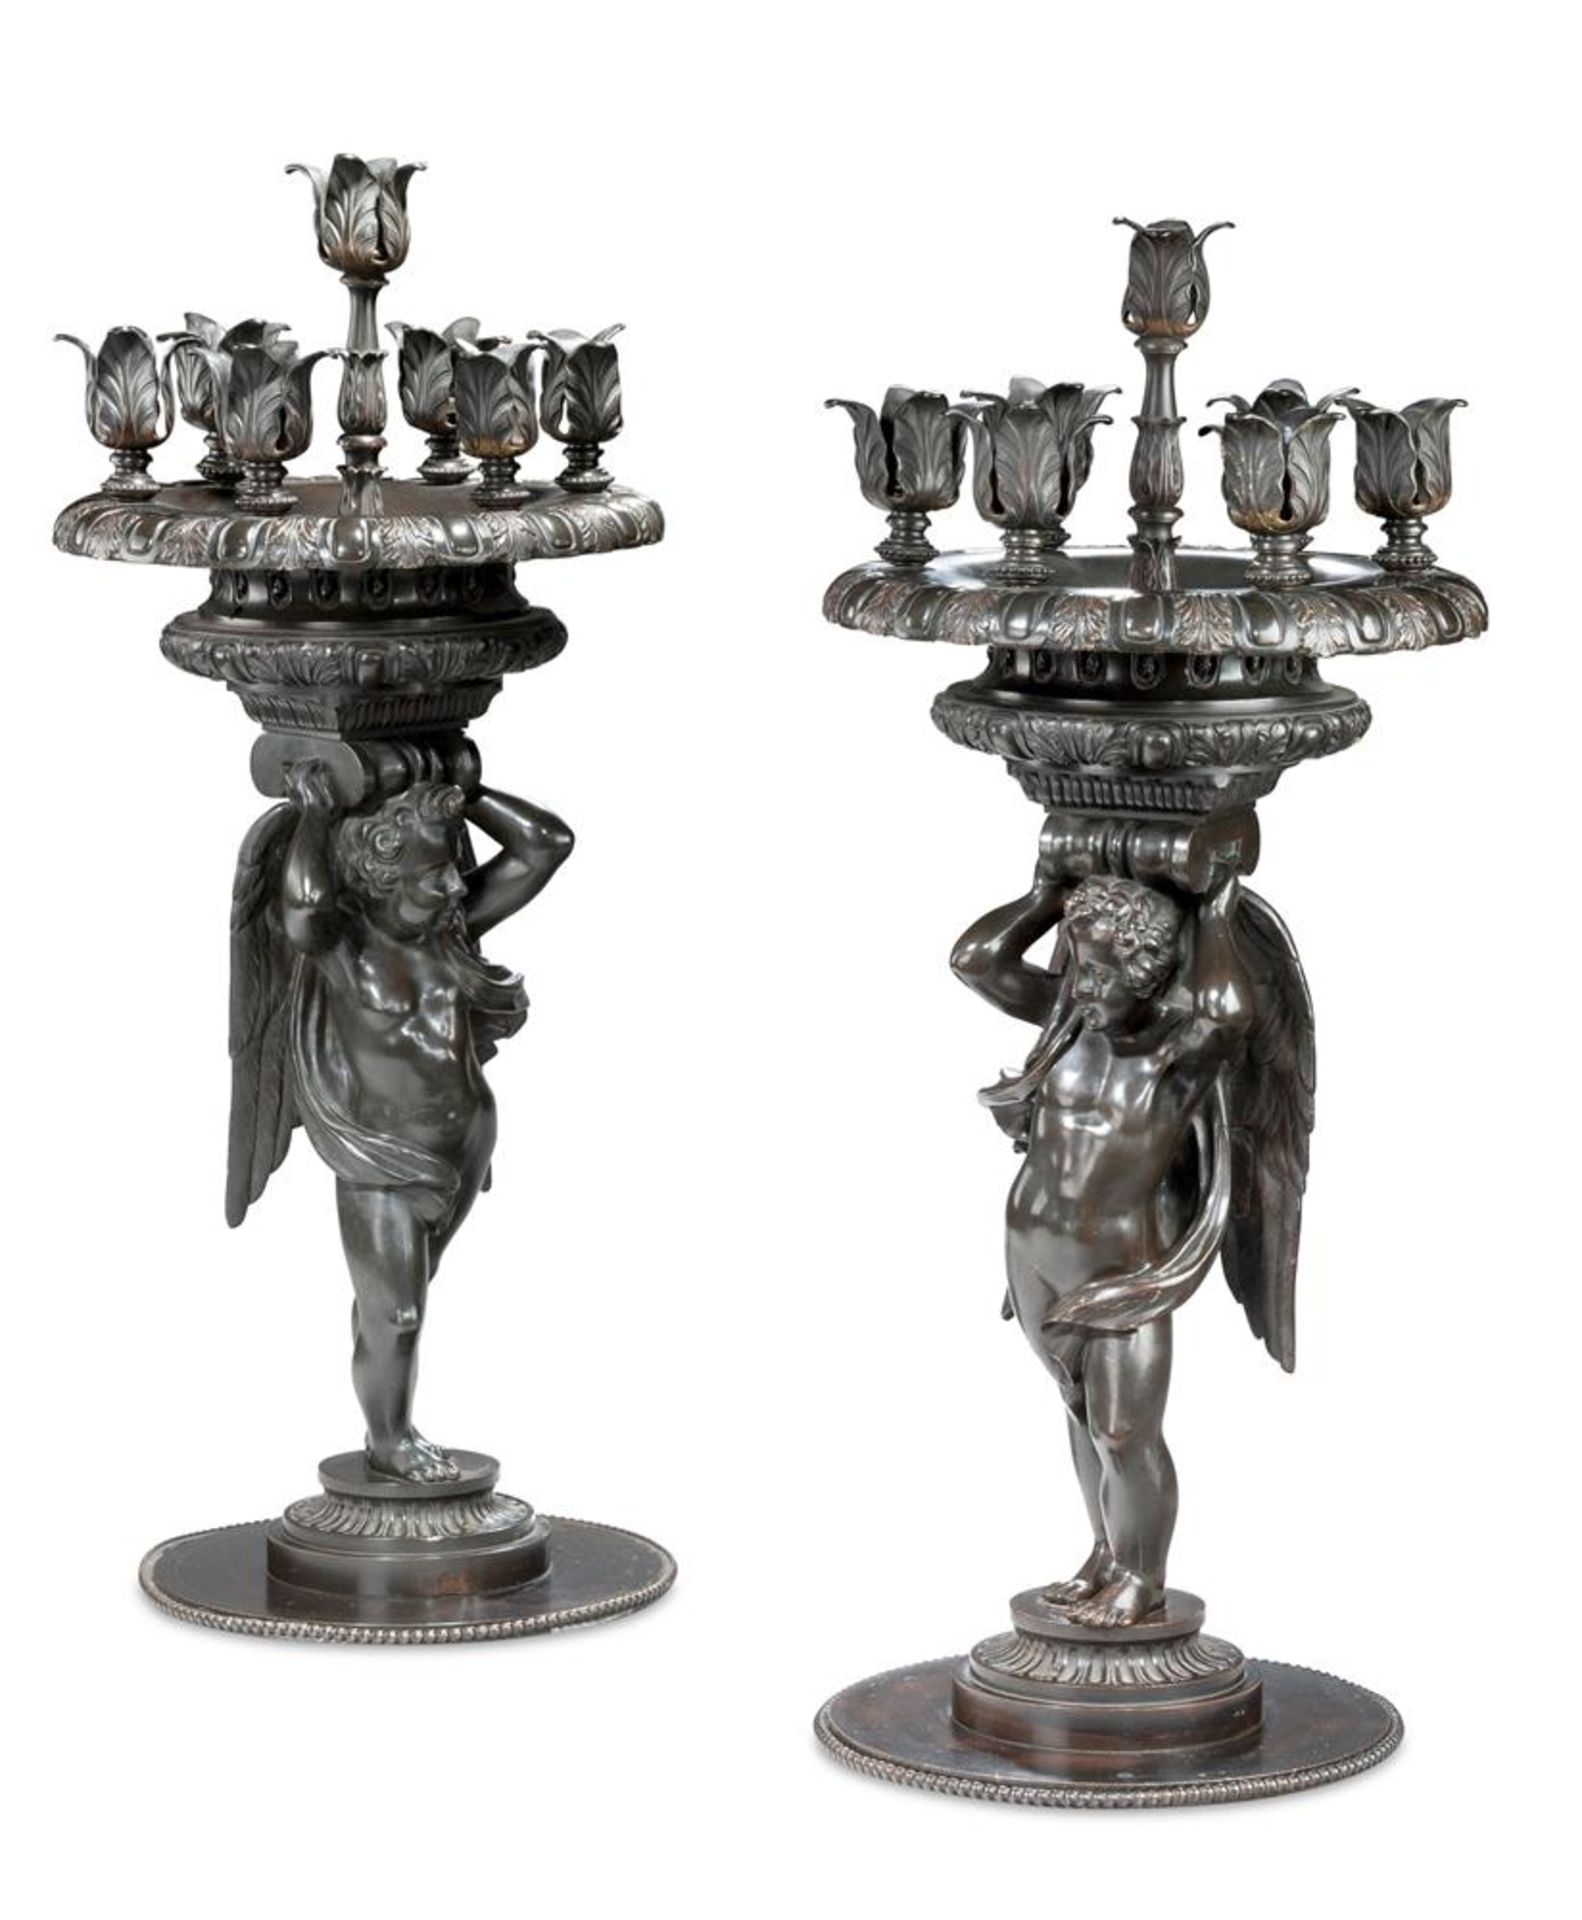 A PAIR OF BRONZE FIGURAL TABLE CANDELABRA, ITALIAN, LATE 19TH/EARLY 20TH CENTURY